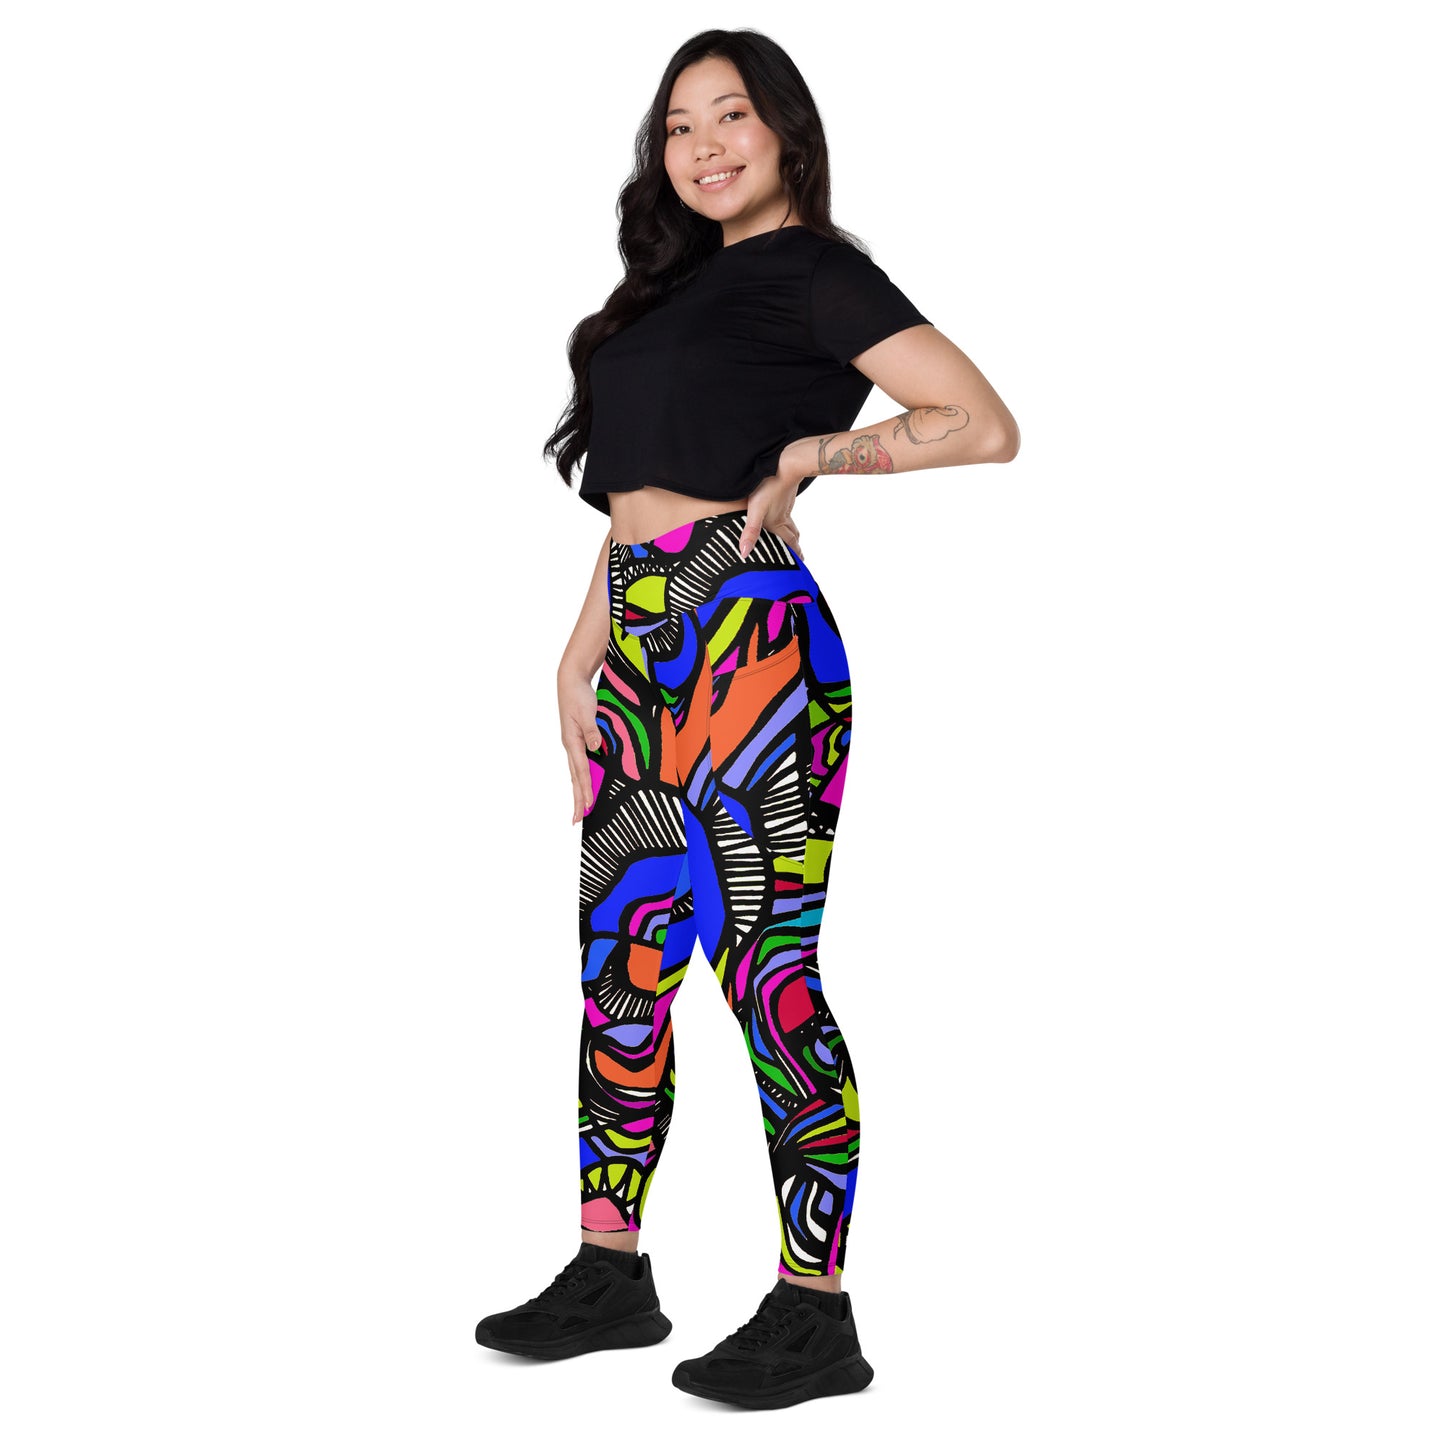 It's a Colorful Whirled Leggings with pockets